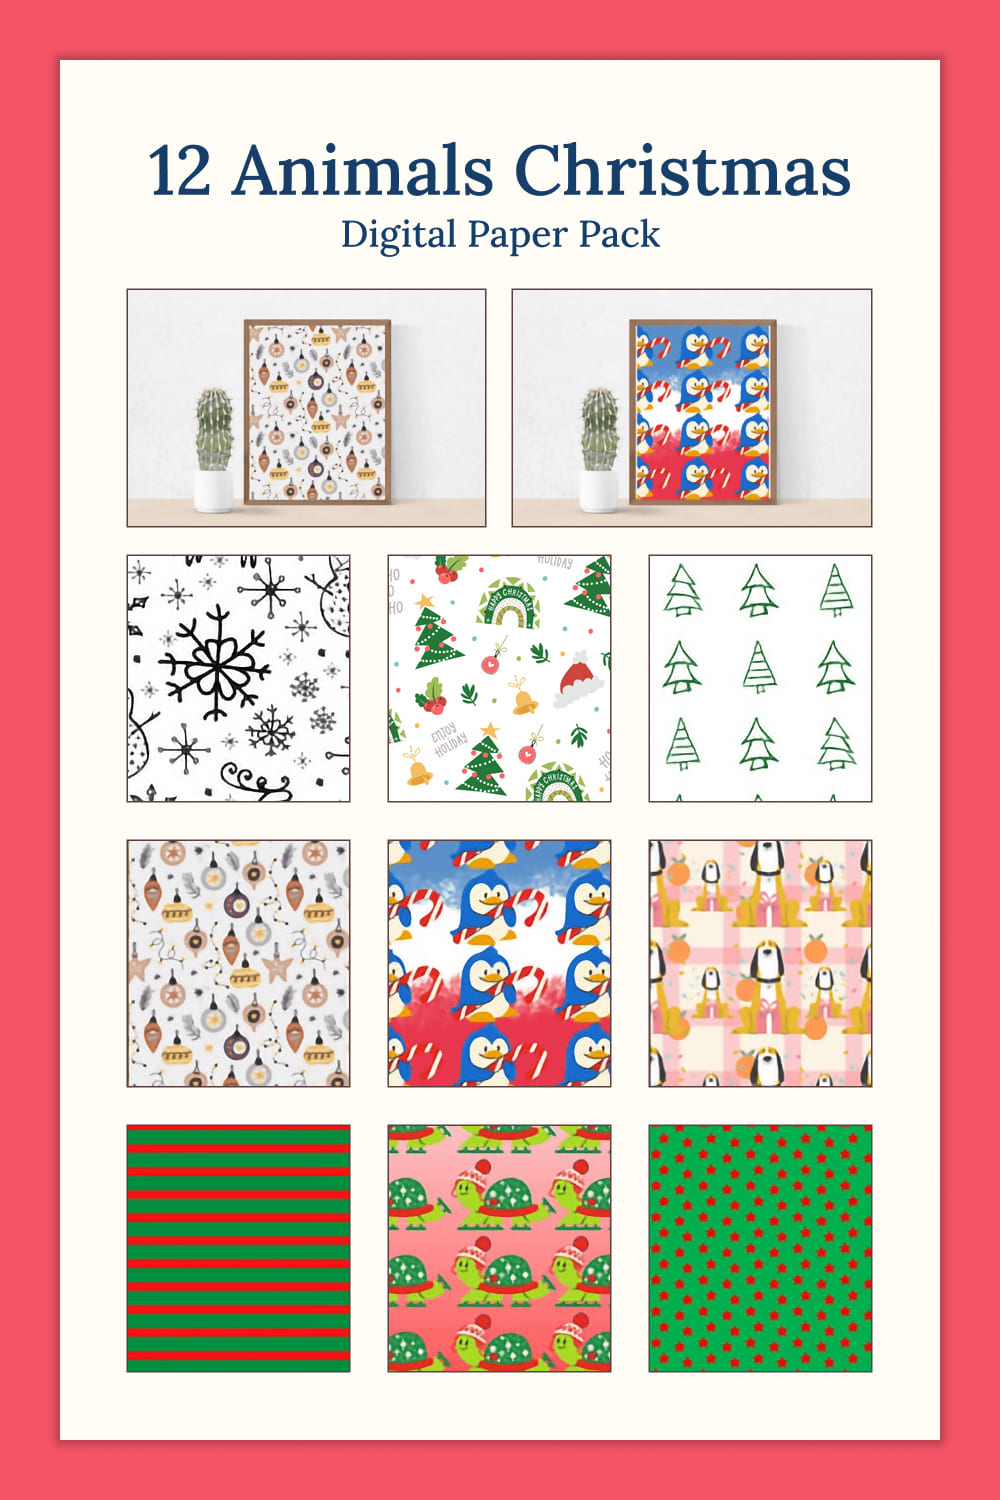 Christmas snowflakes, Christmas trees, penguins and New Year's toys are drawn on 12 patterns.